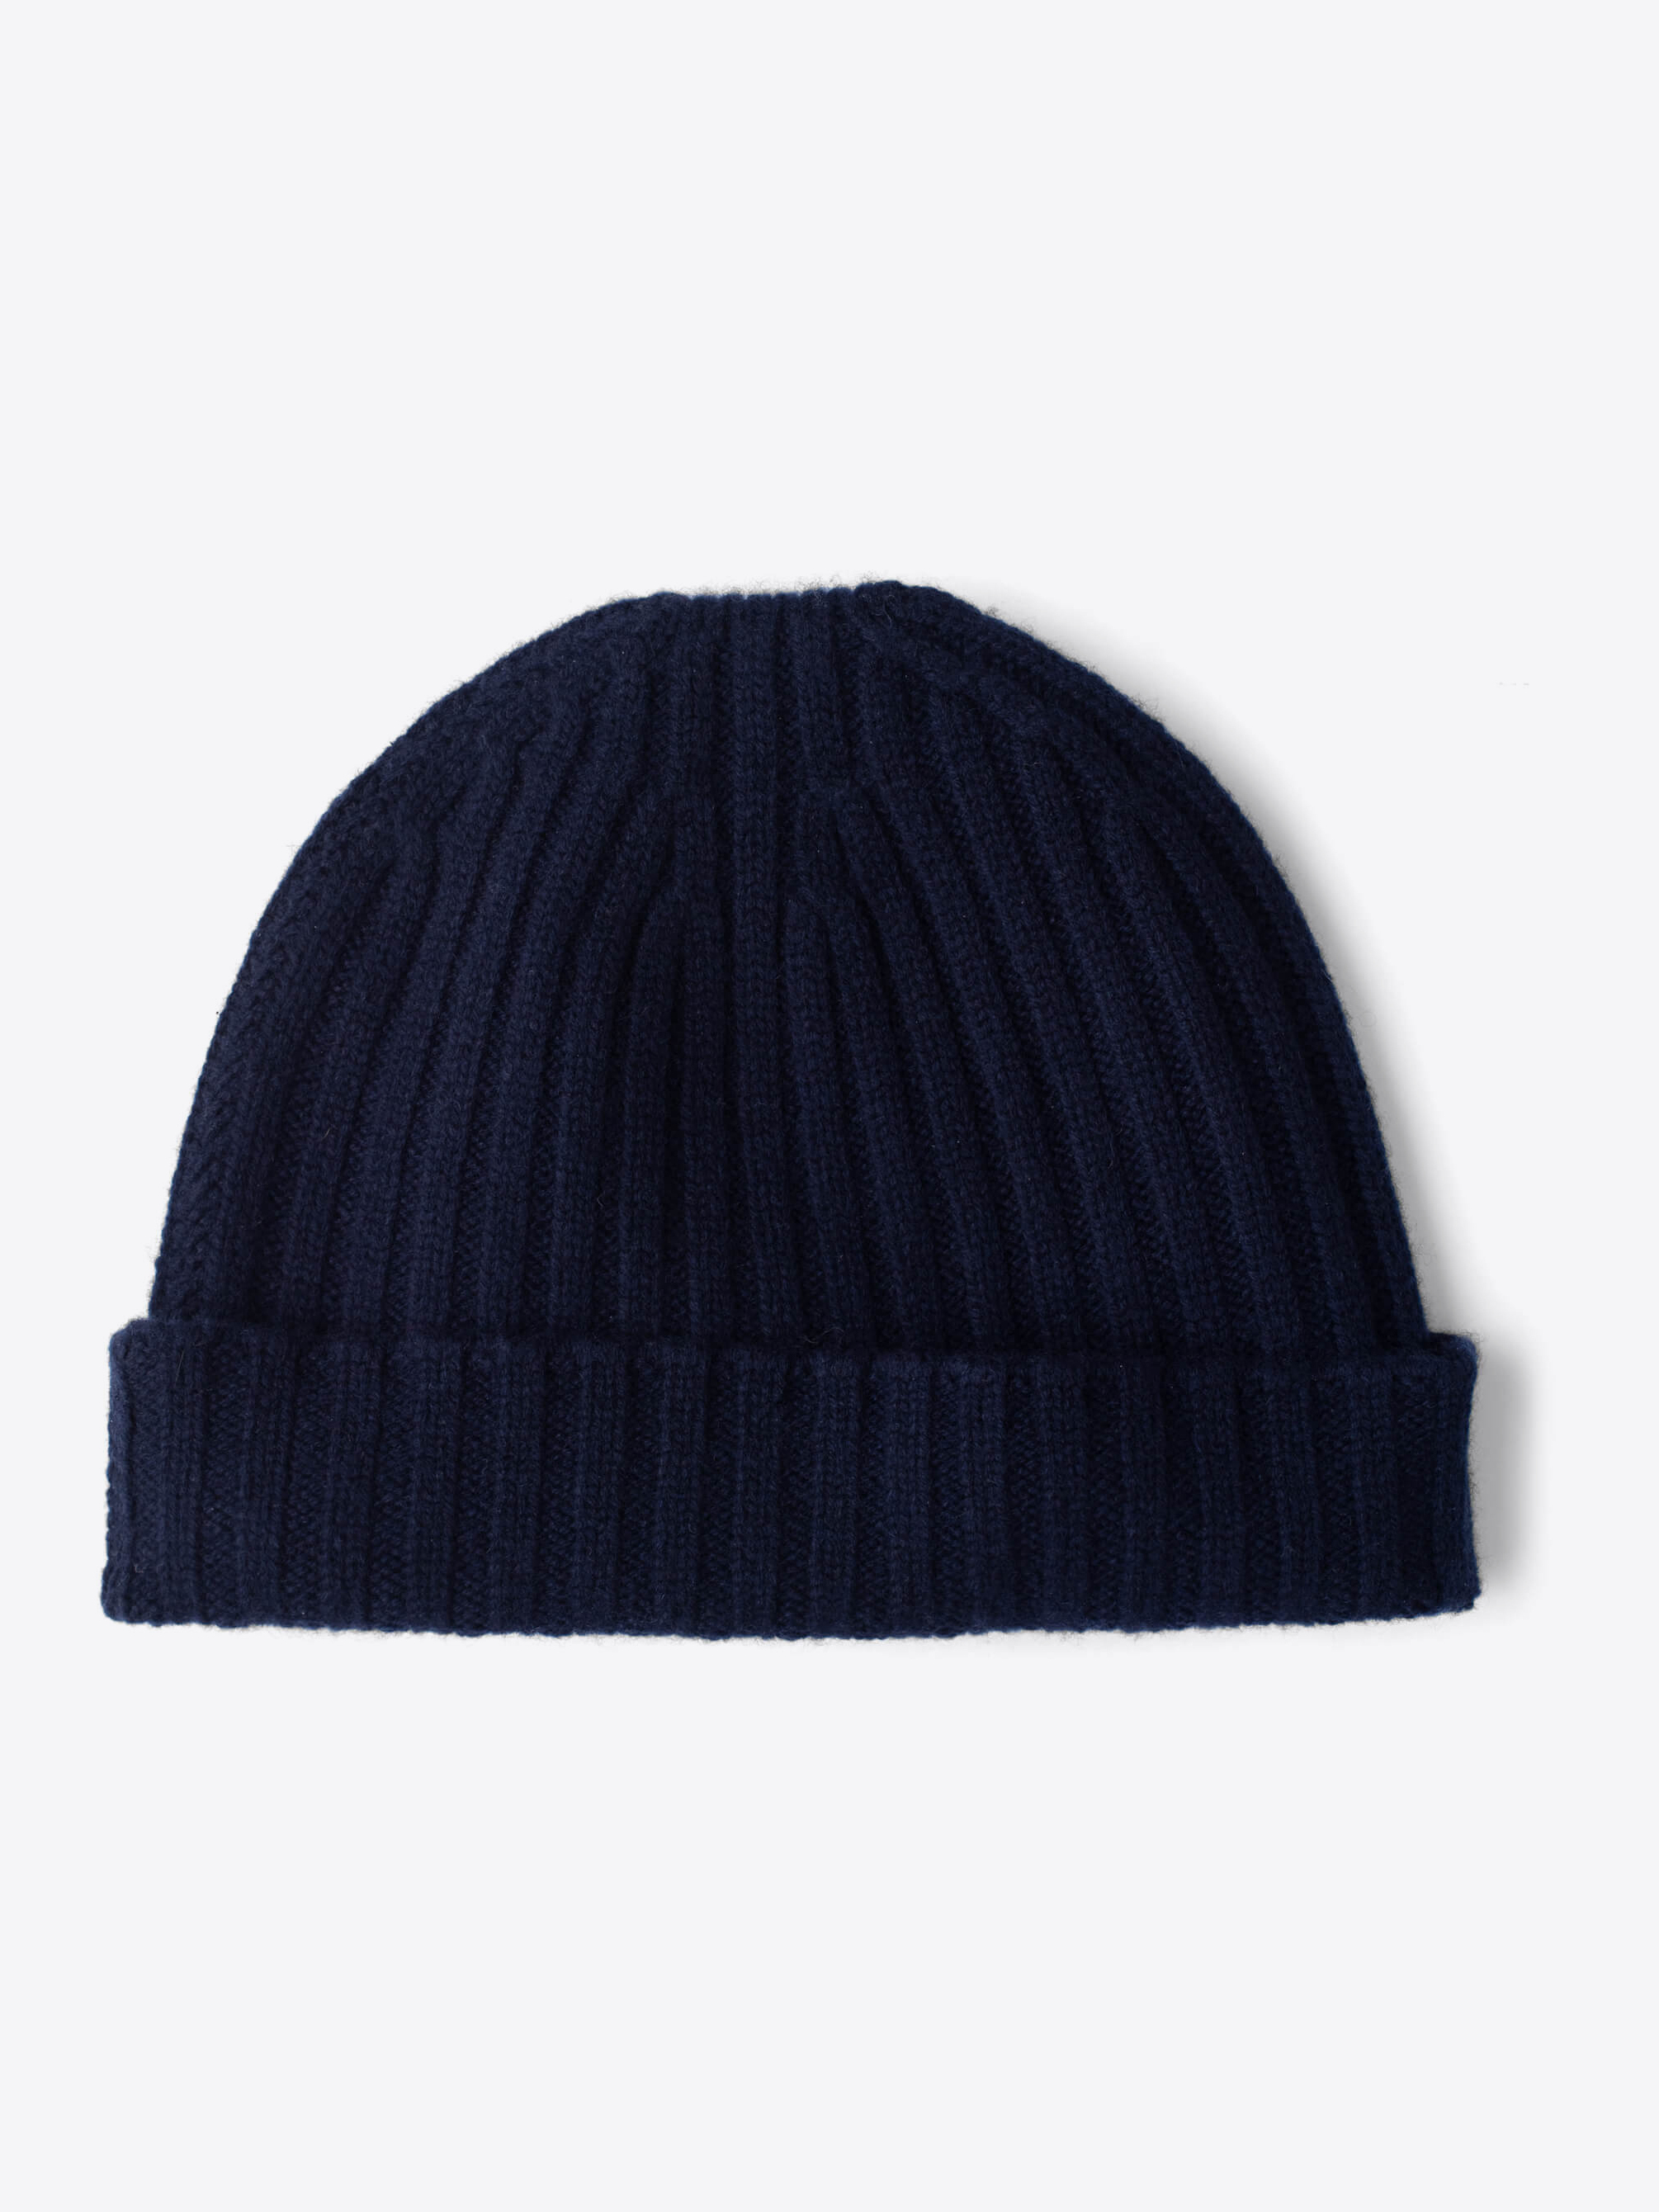 Zoom Image of Navy Cashmere Beanie